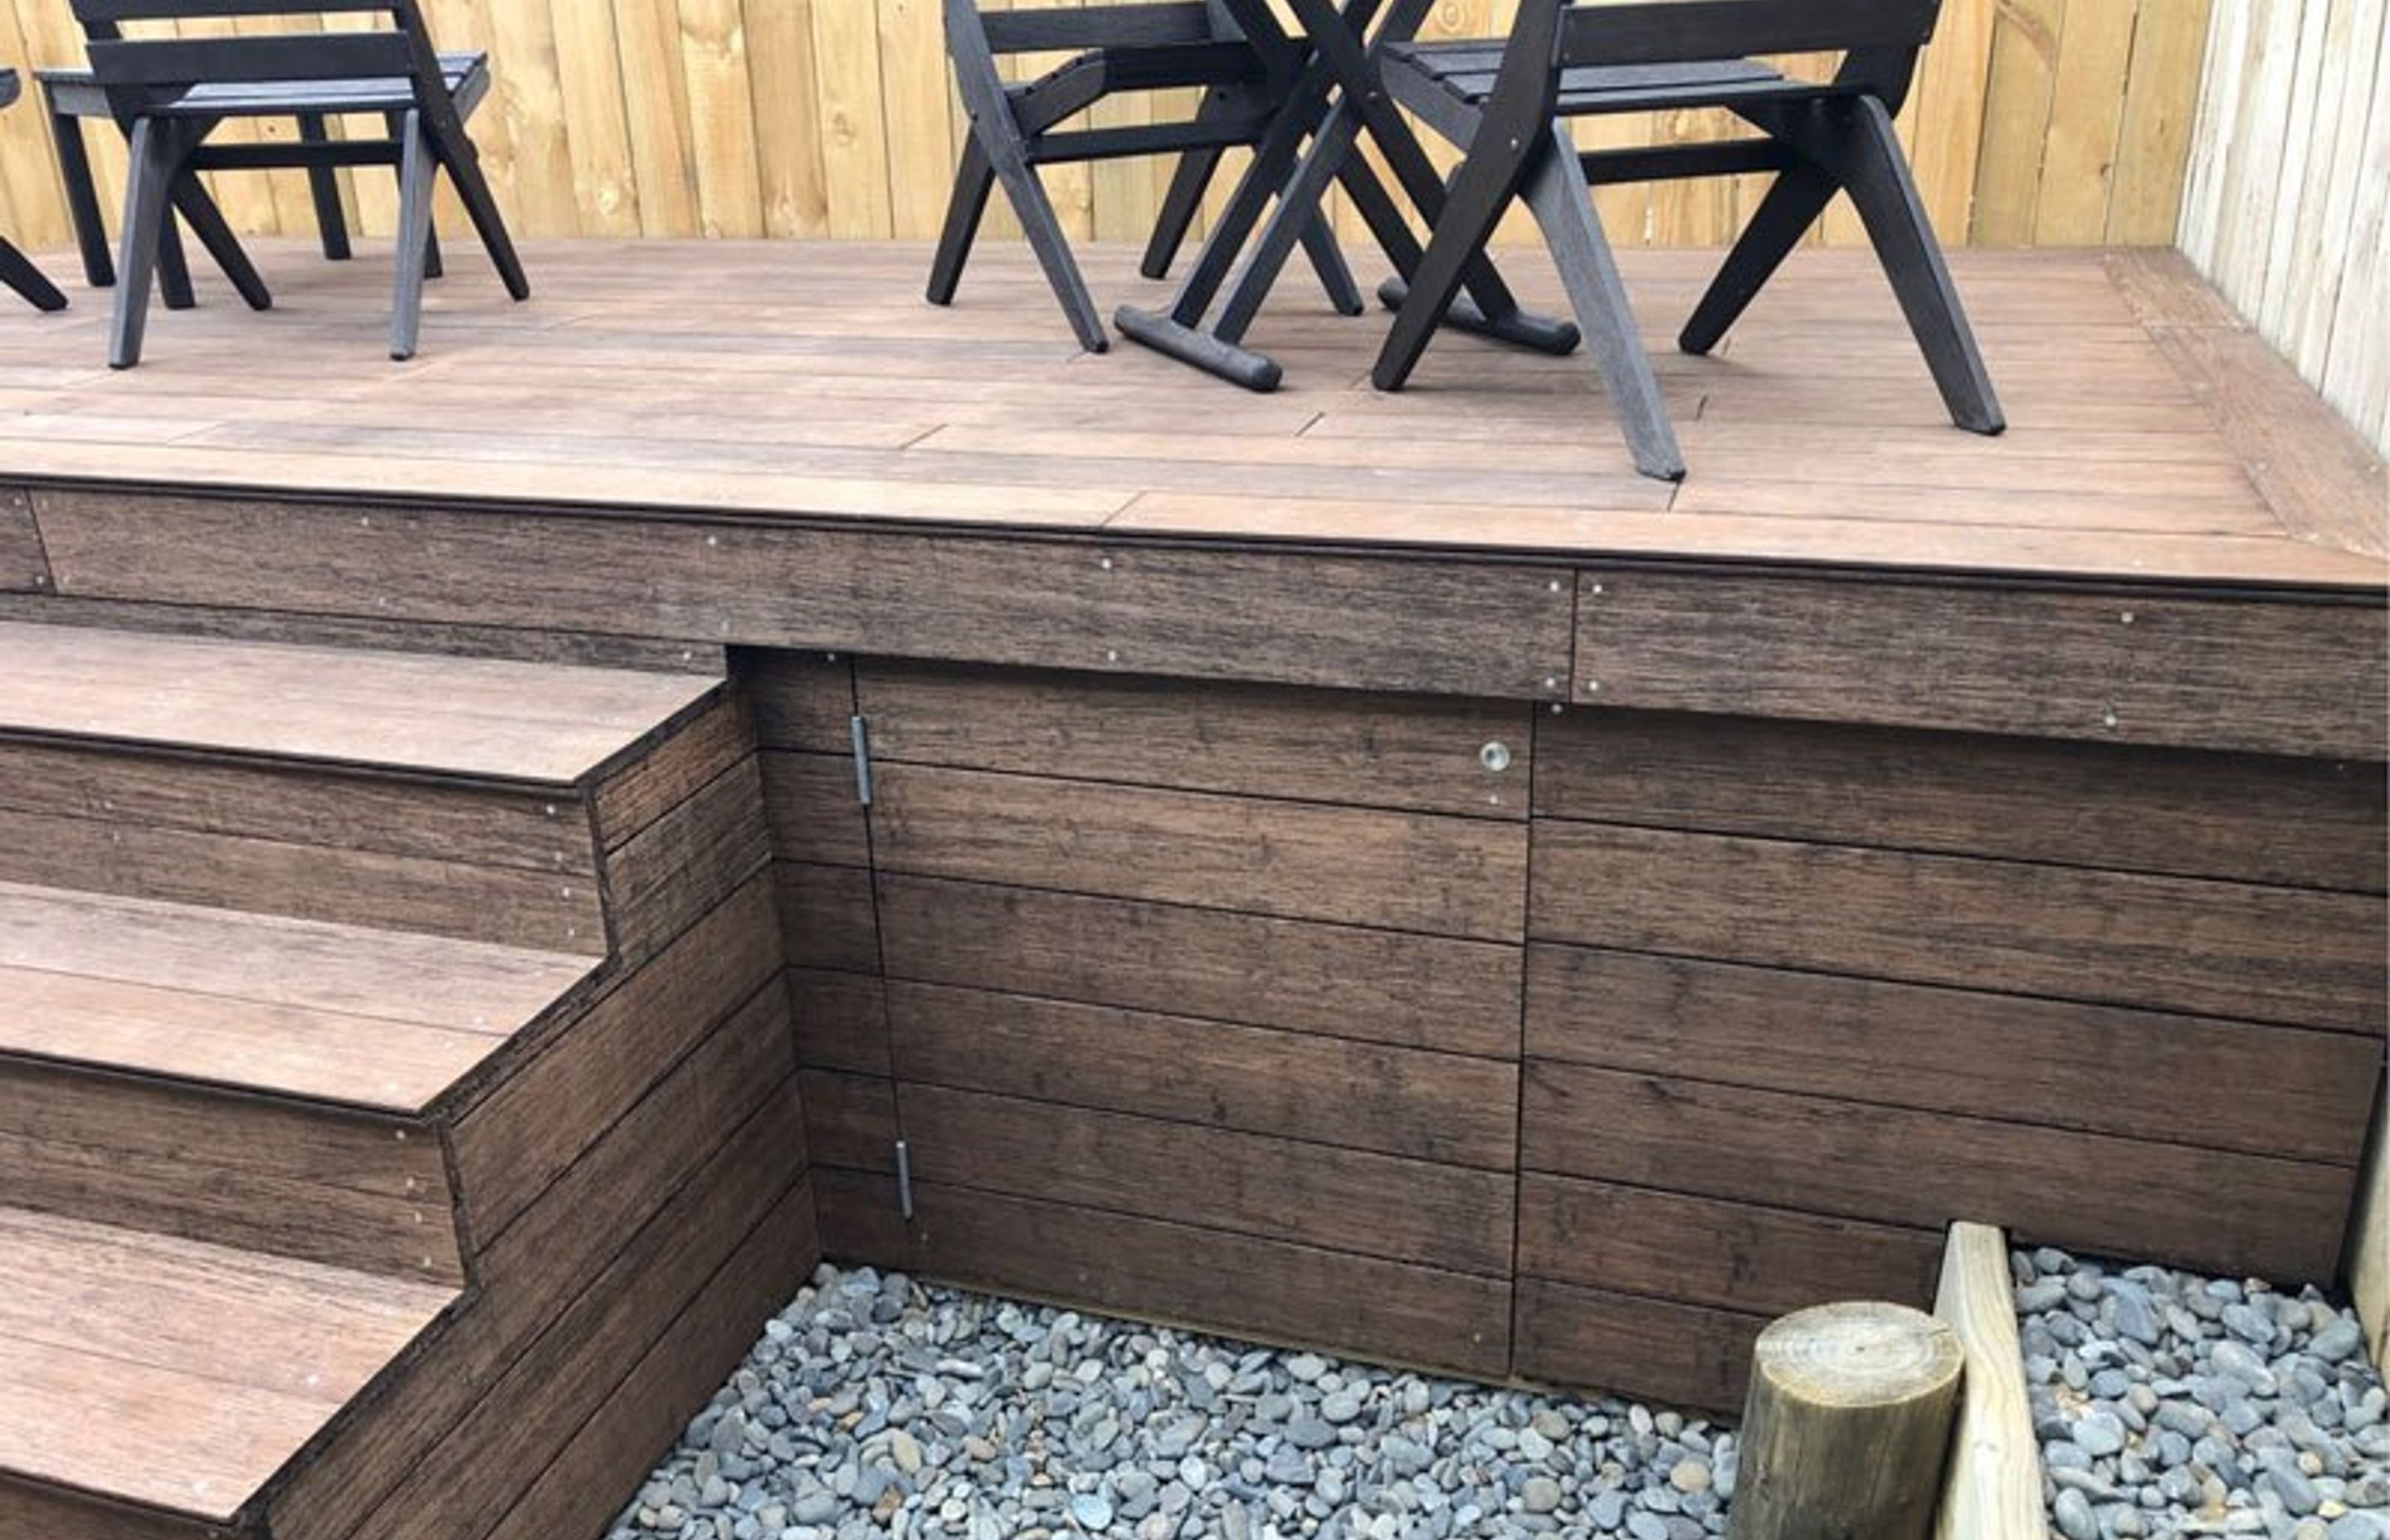 Really impressed with Bamboo X-treme Decking!